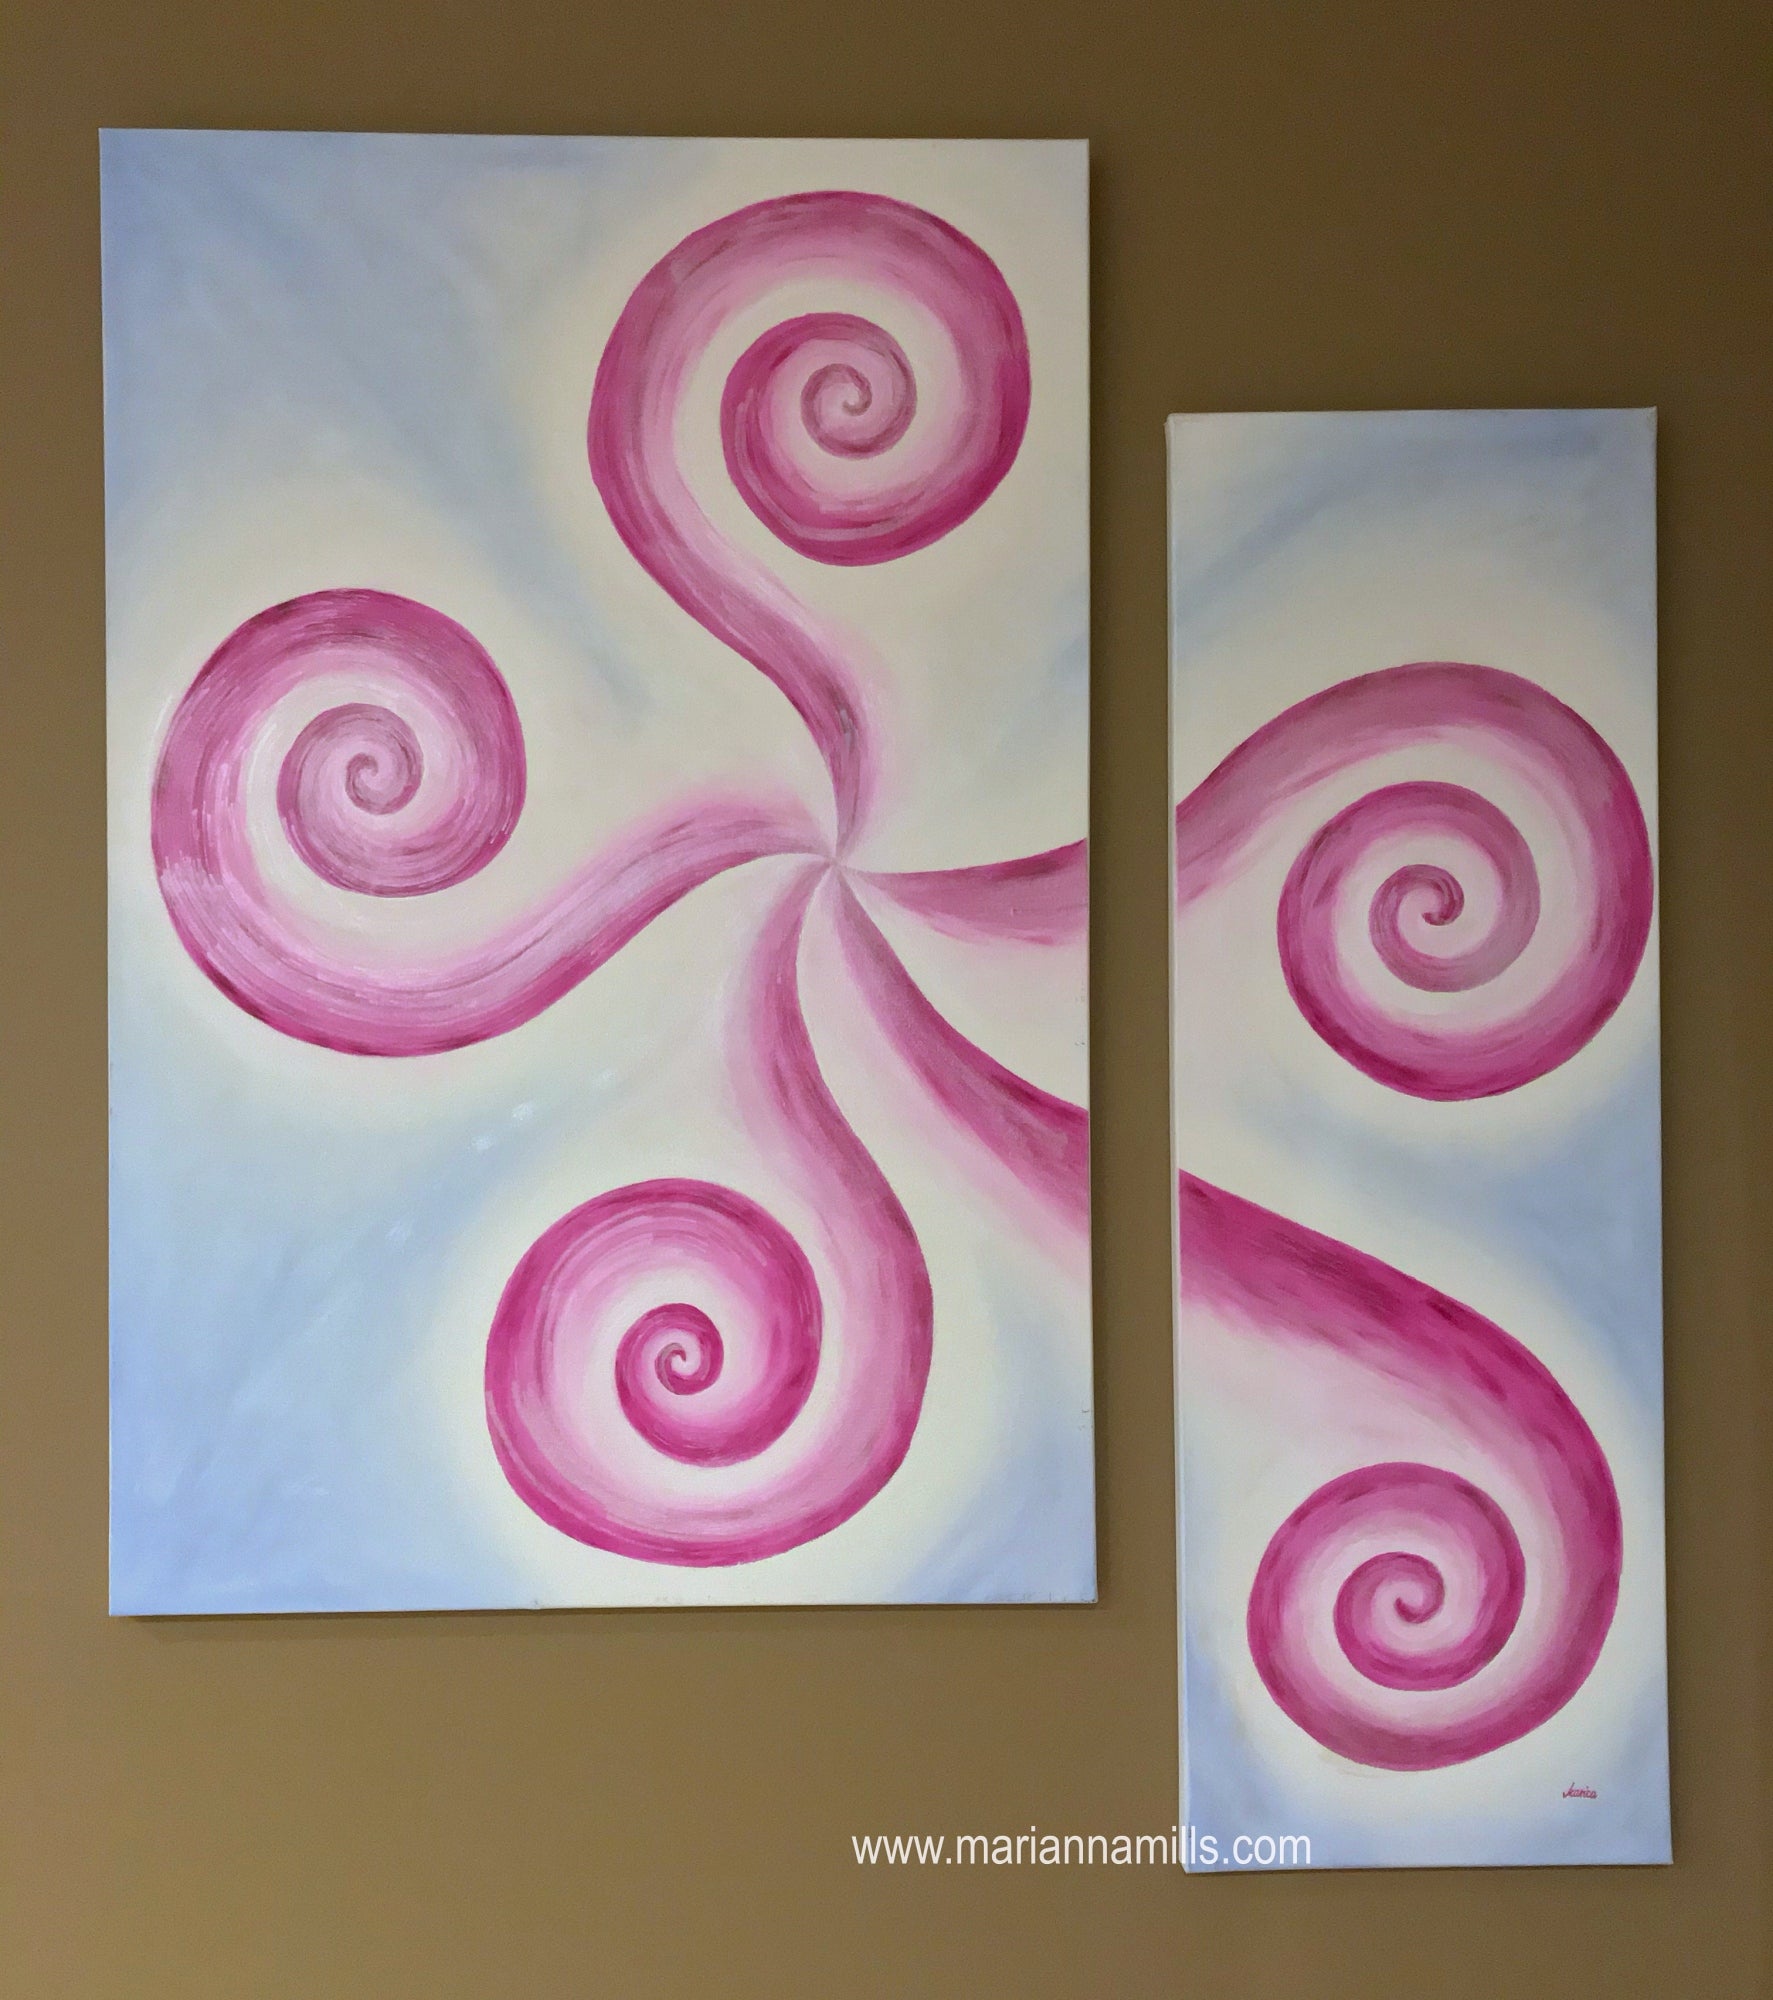 original 2 canvas panel large oil abstract painting with mica powder by Hungarian visionary artist Marianna Mills. Total wall space 43 inches x 38 inches. Title is Thinking it over and over again.. is a beautiful visionary fine art featuring spirals in pink, soft blue and white colors in an ombre effect with shimmering, sparkling mica powder, this is silver, indigo and iridescent give a desired effect to this amazing artwork. No need framing, ready to hang on your wall.